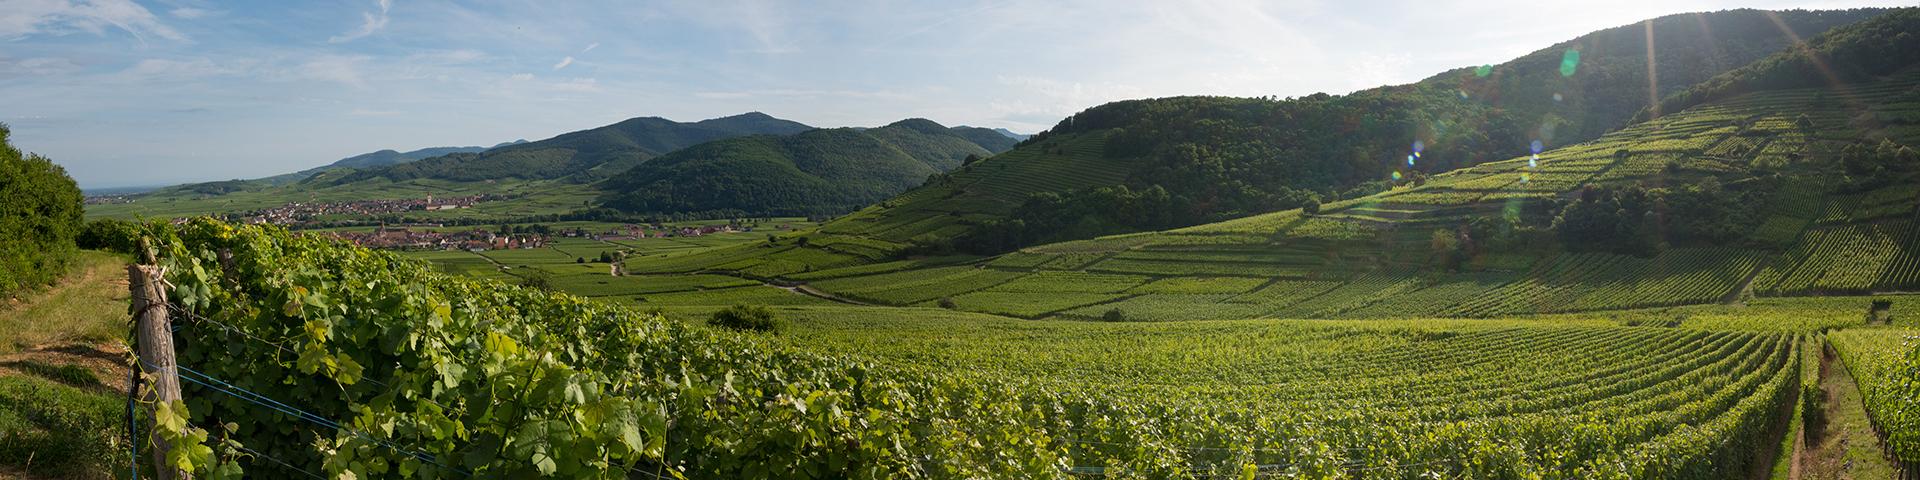 Panoramic view of the vineyards of Alsace, Vosges